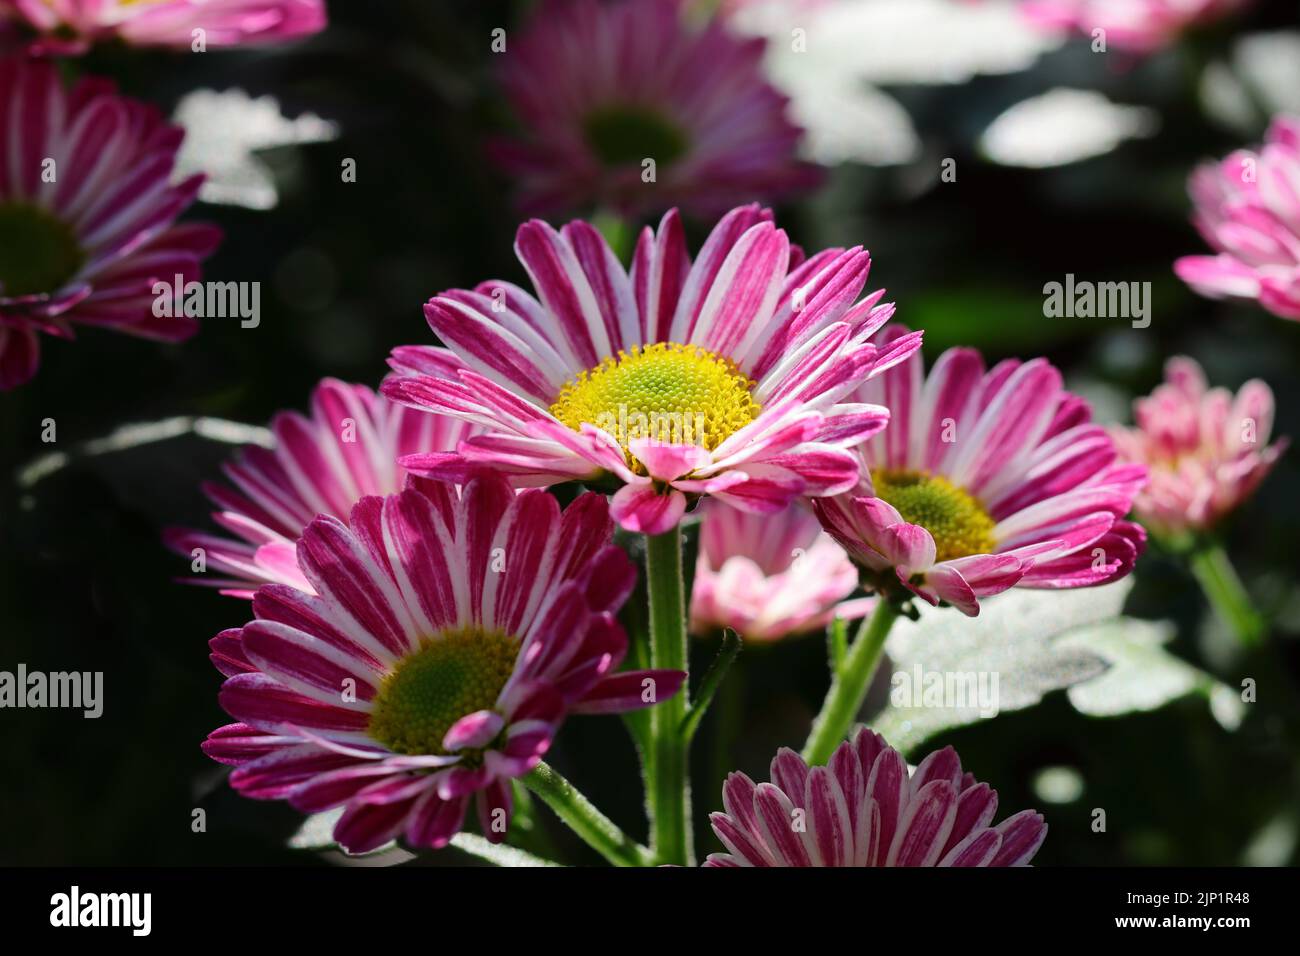 close-up of beautiful fresh chrysanthemum flowers in a flower bed, side view Stock Photo